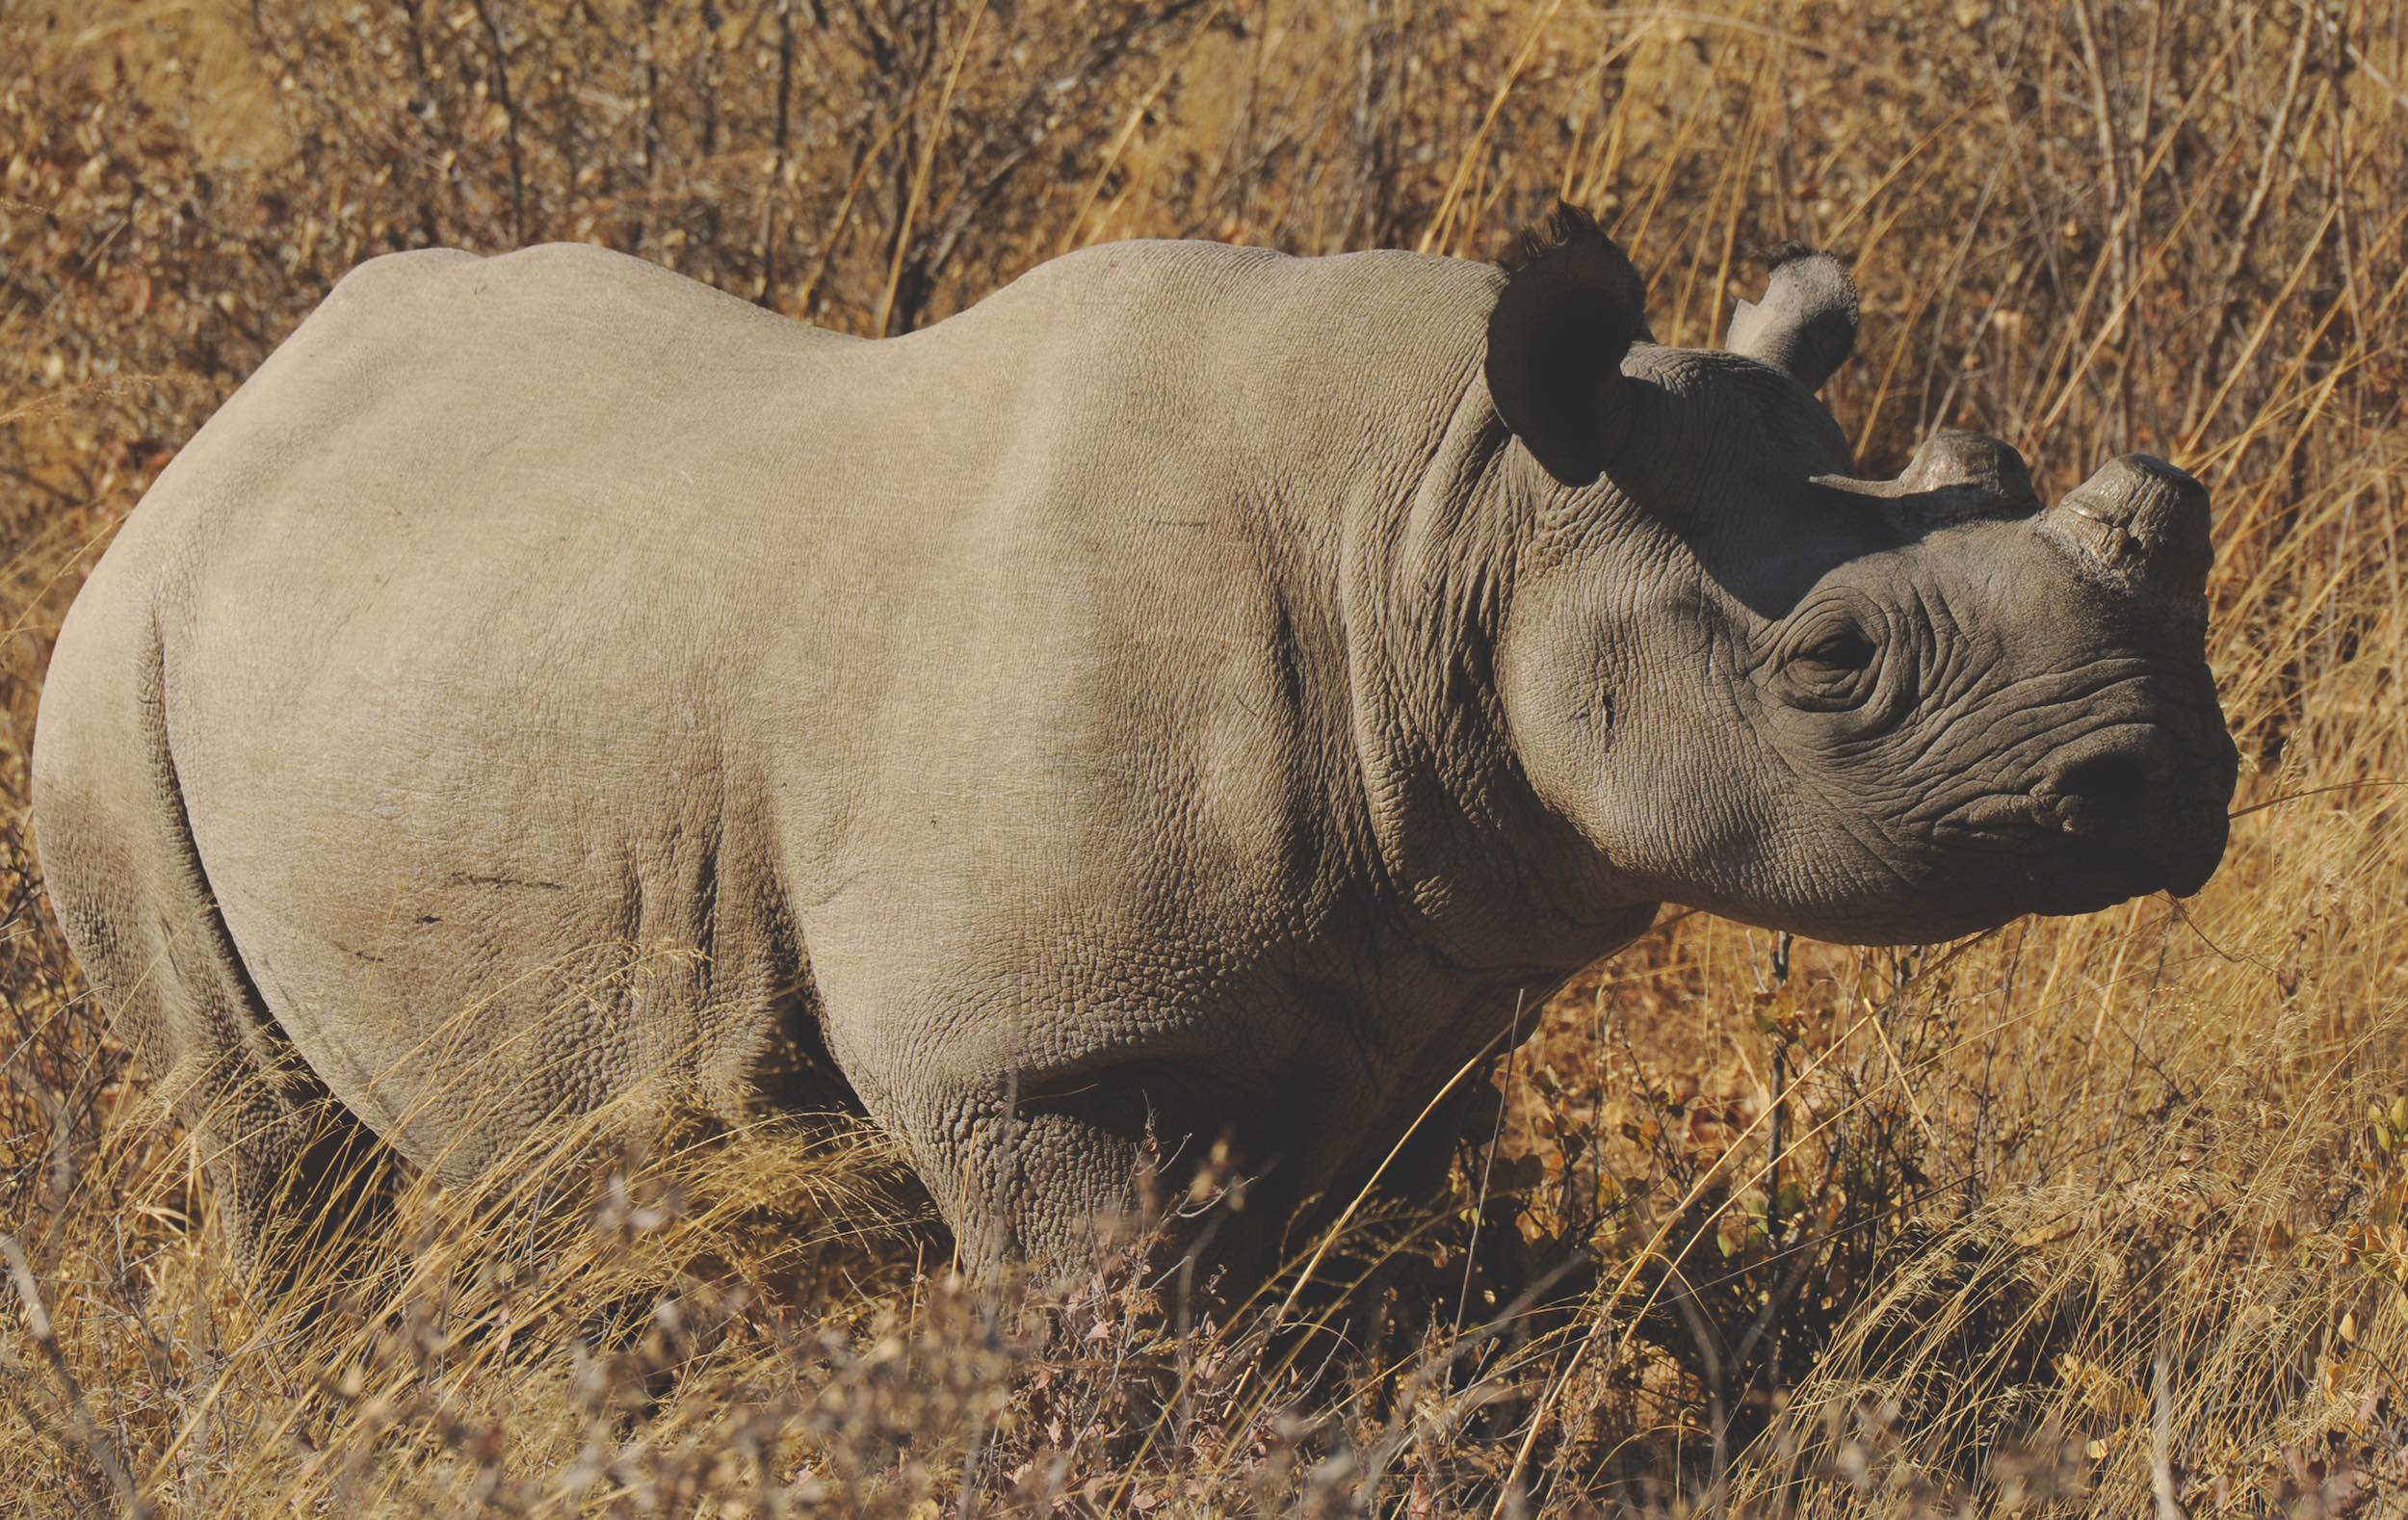 A black rhino that has had its horns removed to protect it.